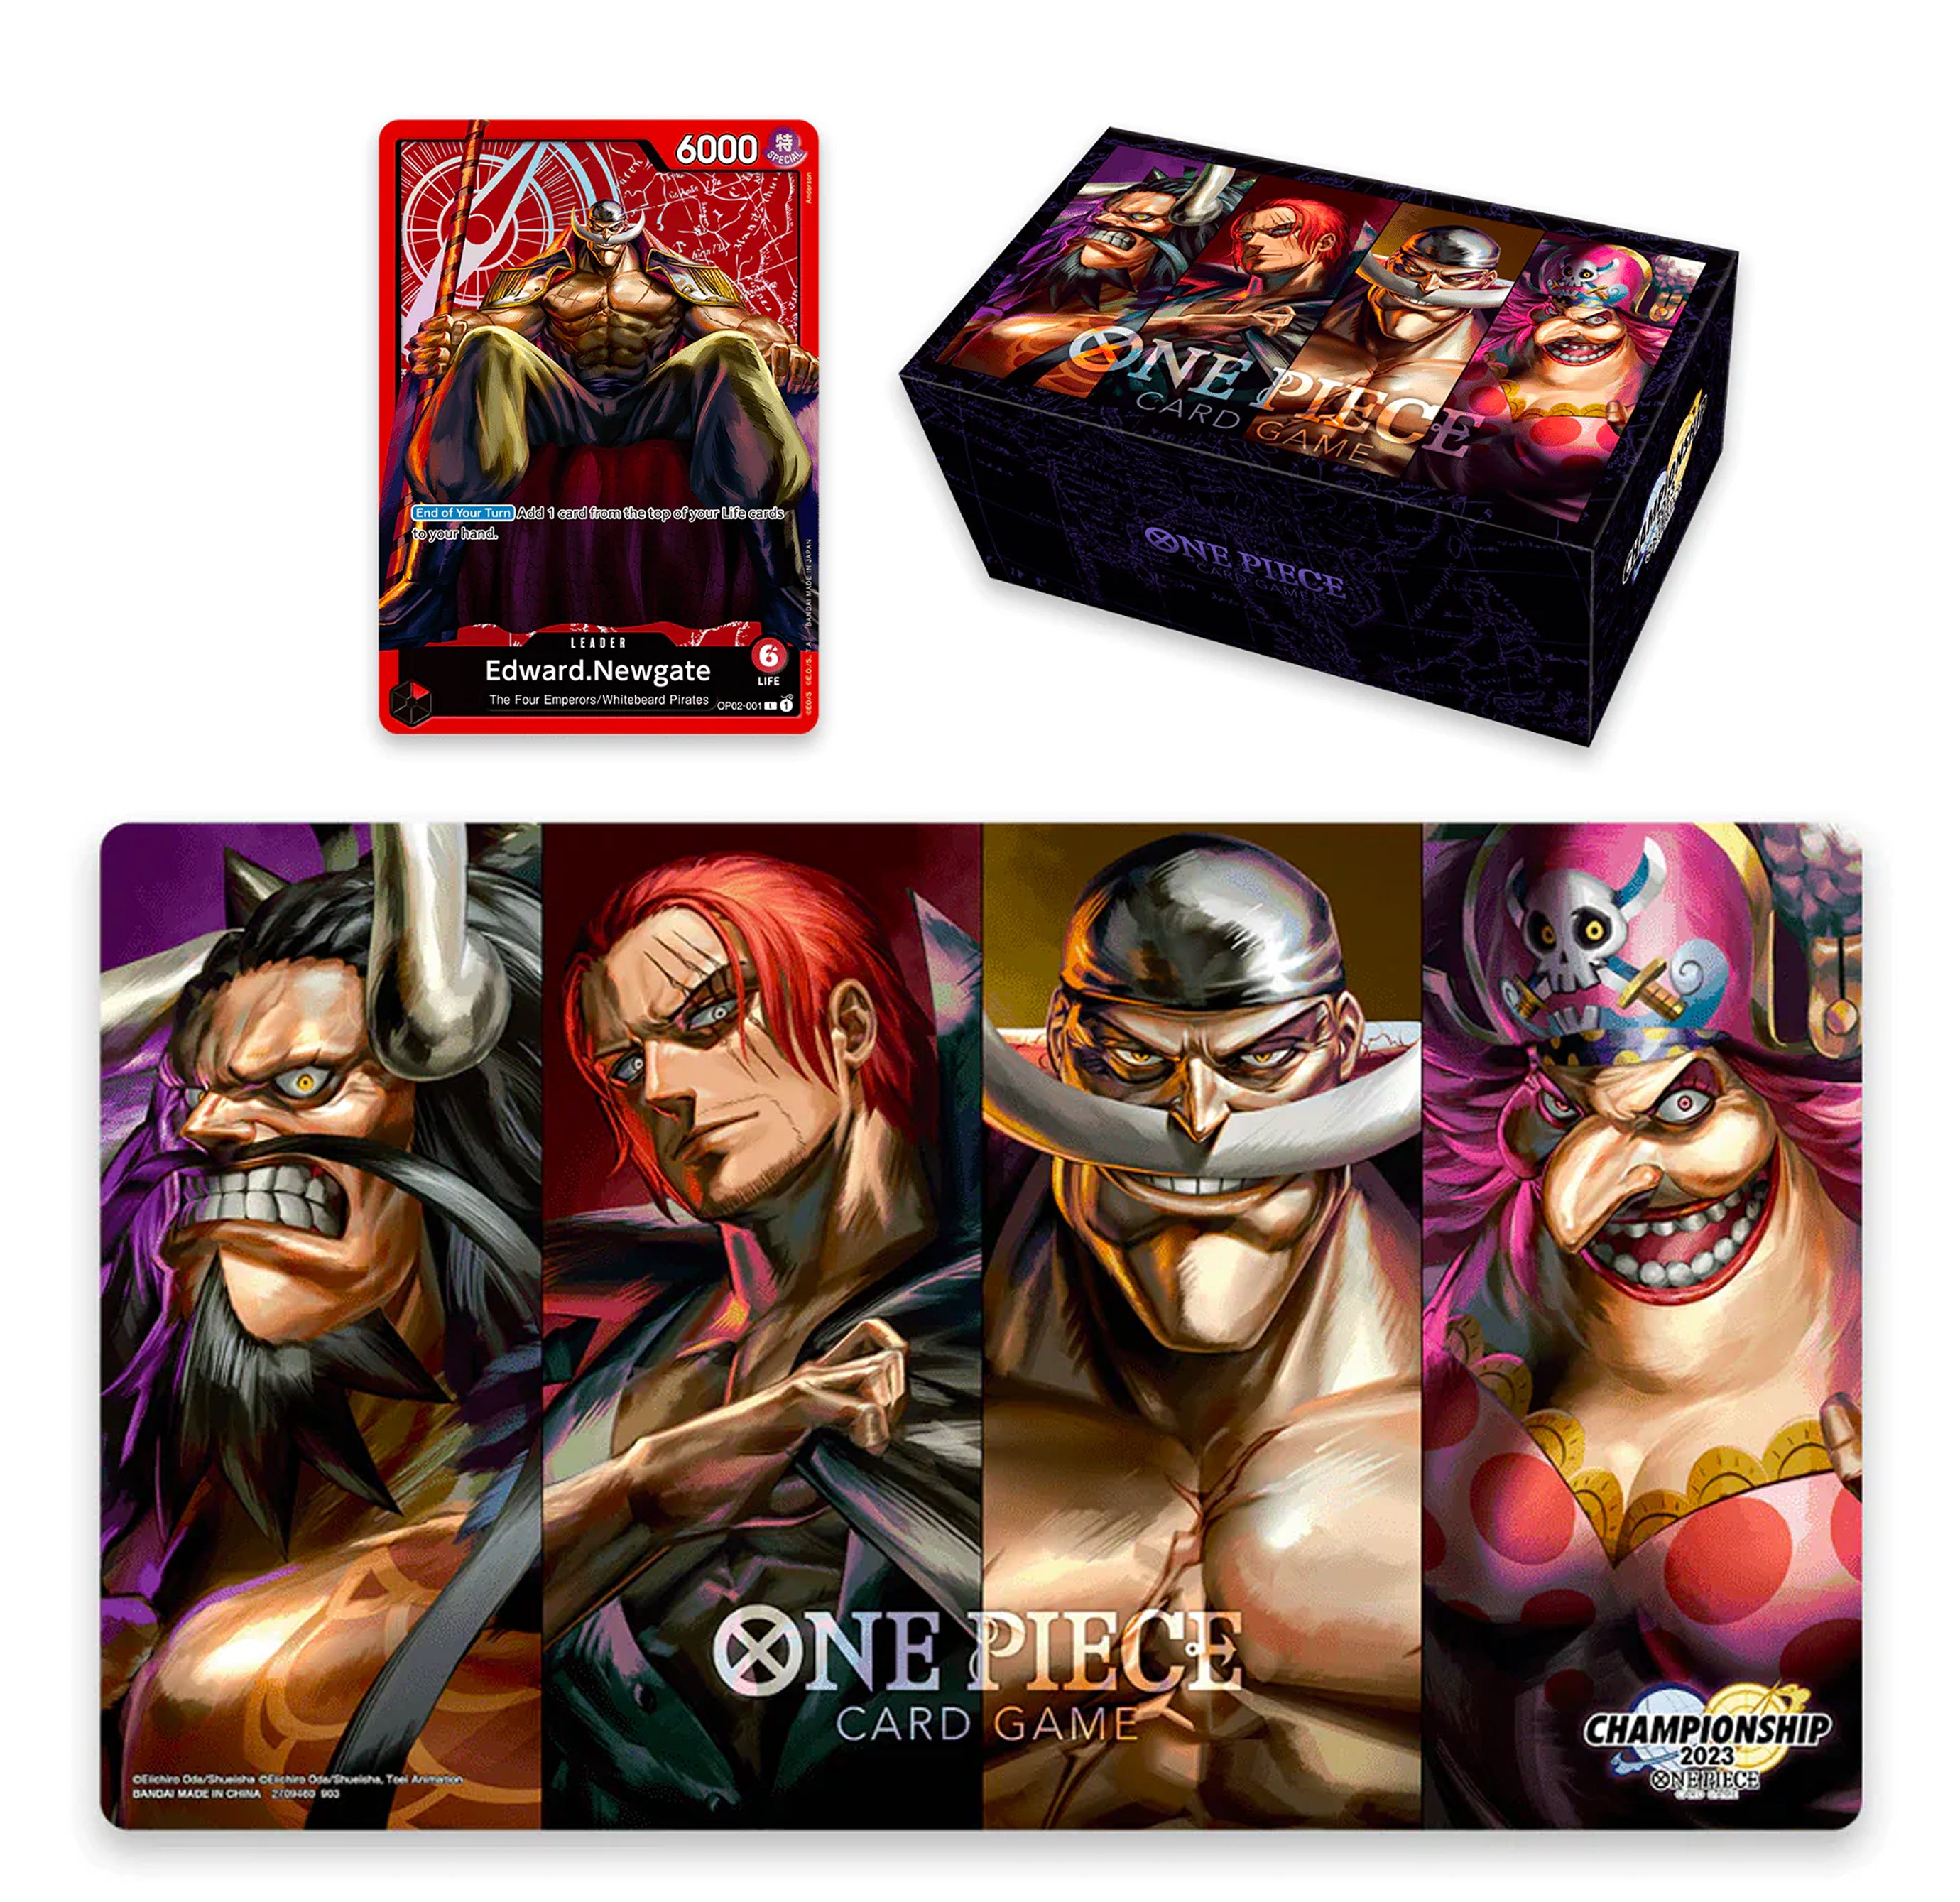 All One Piece Card Game Sets (In Order) - Card Gamer